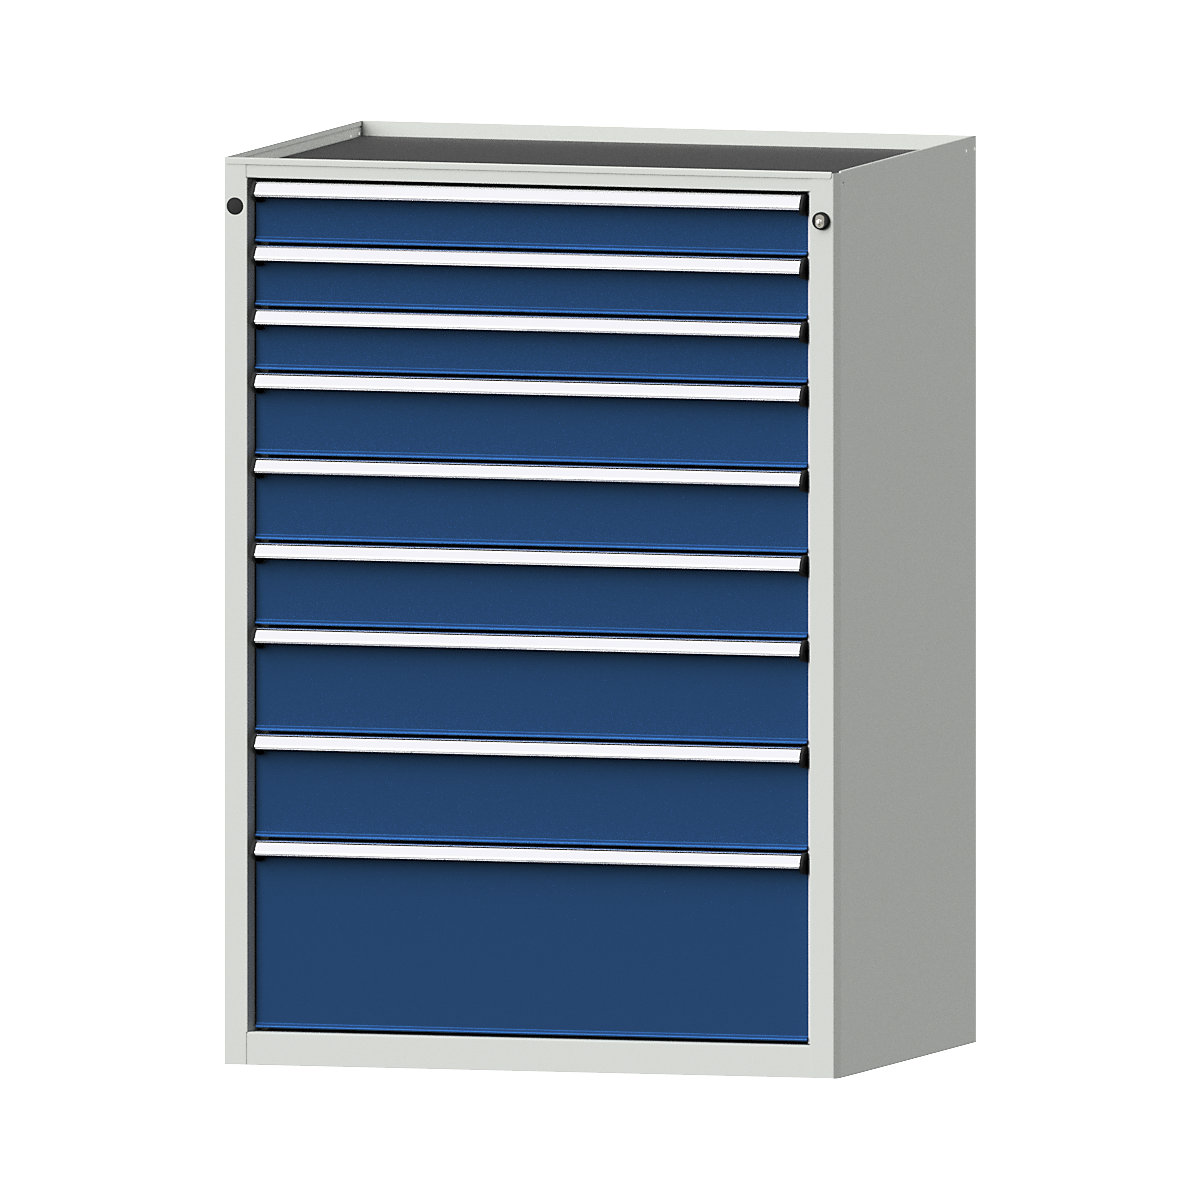 Drawer cupboard – ANKE, WxD 910 x 675 mm, 9 drawers, height 1280 mm, front in gentian blue-18